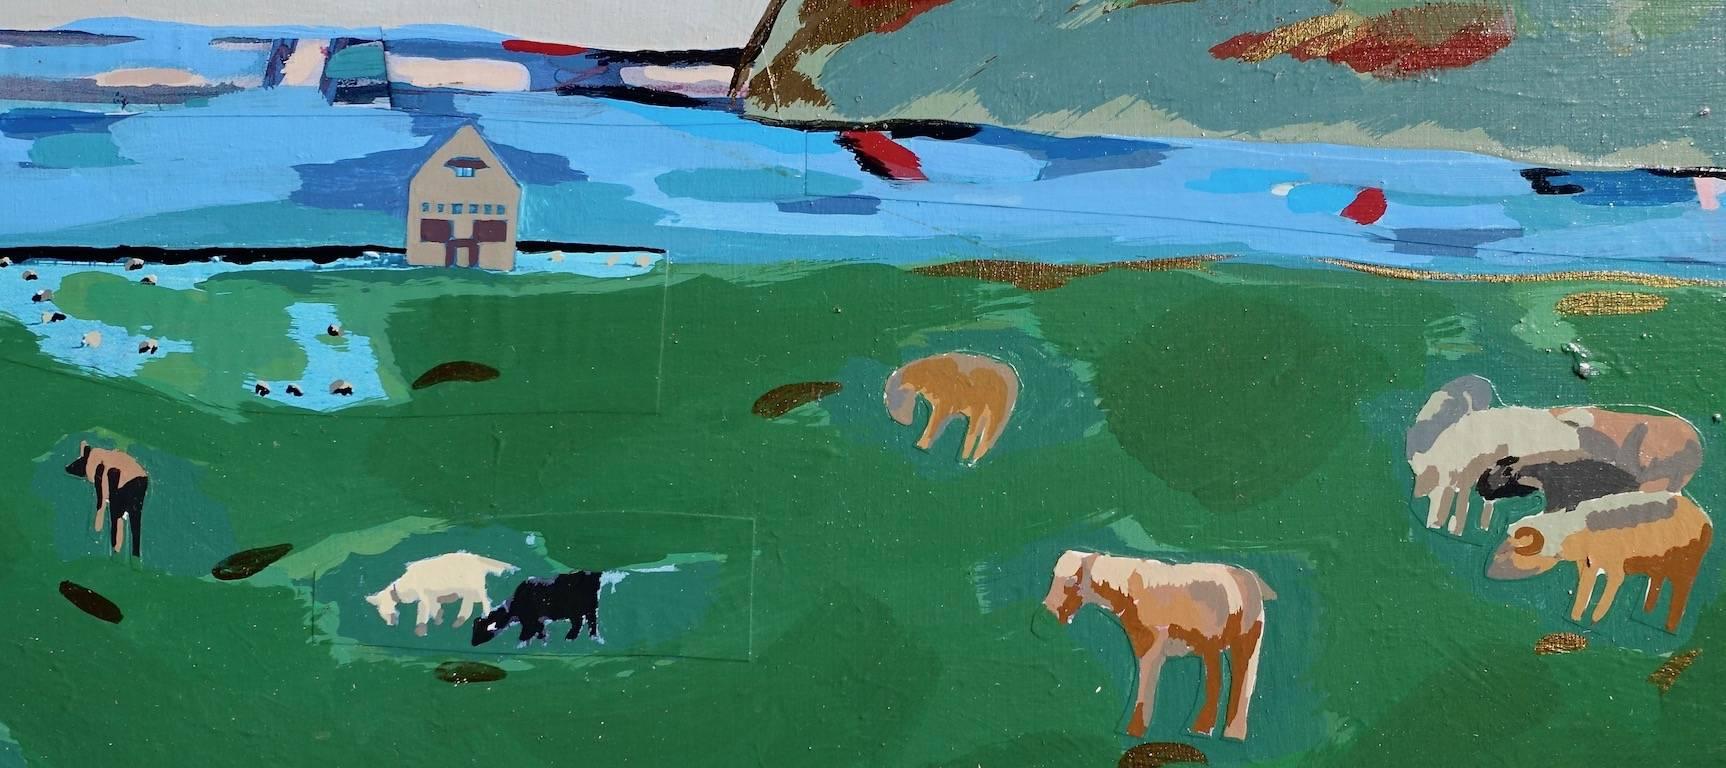 Nan Hass Feldman’s “Wild Horses” is a large 57 x 36 x 1.5 inch acrylic landscape painting with an analogous palette of relaxing greens, blues and yellows. The artist defines 